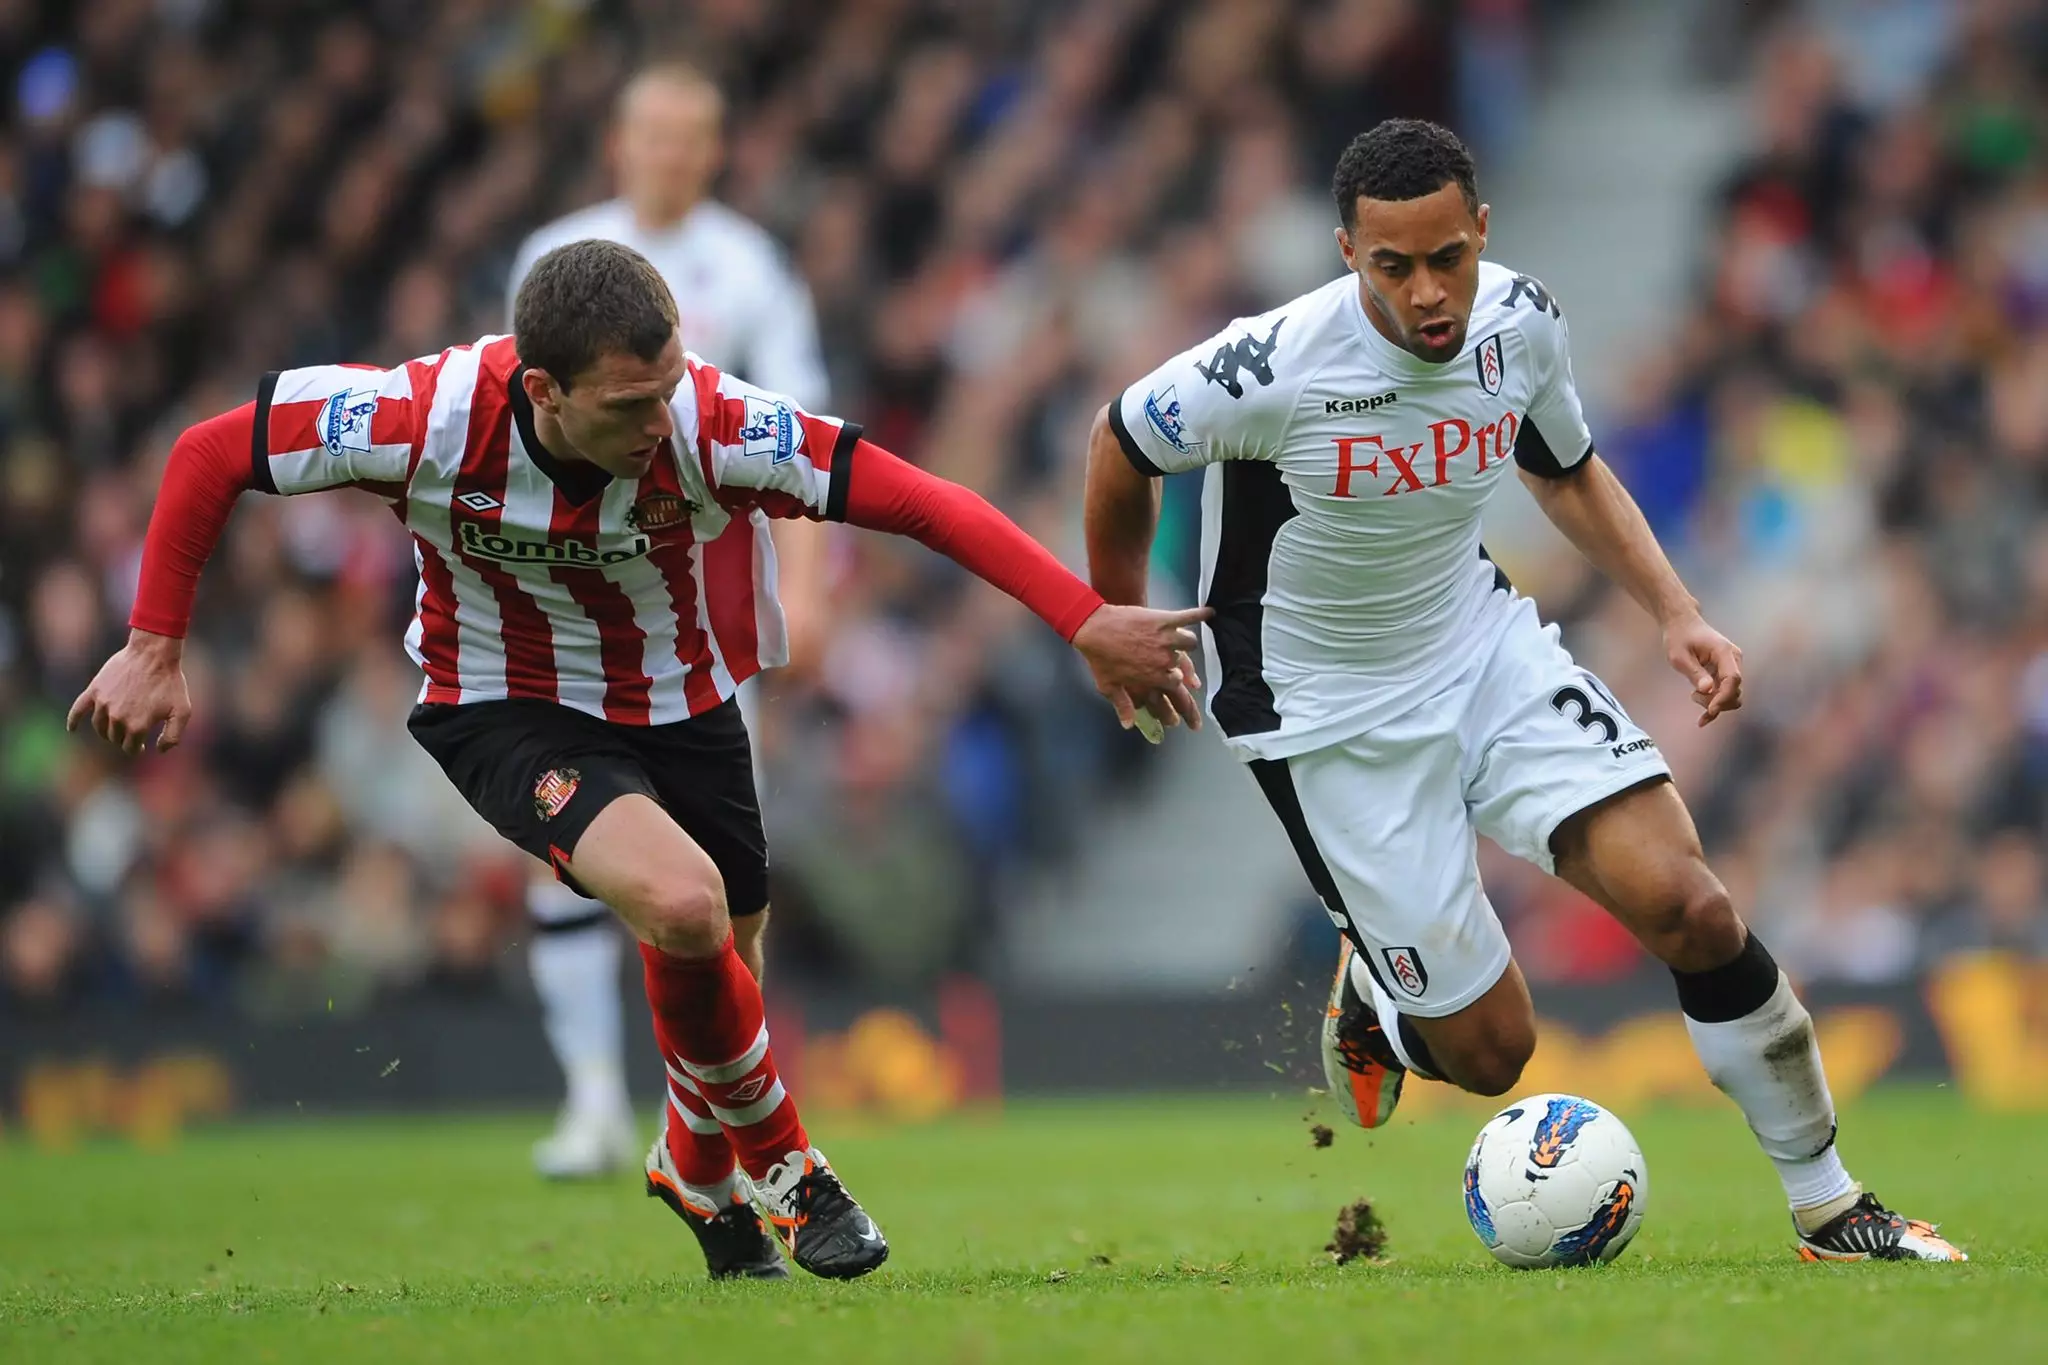 Dembele in action for Fulham. Image: PA